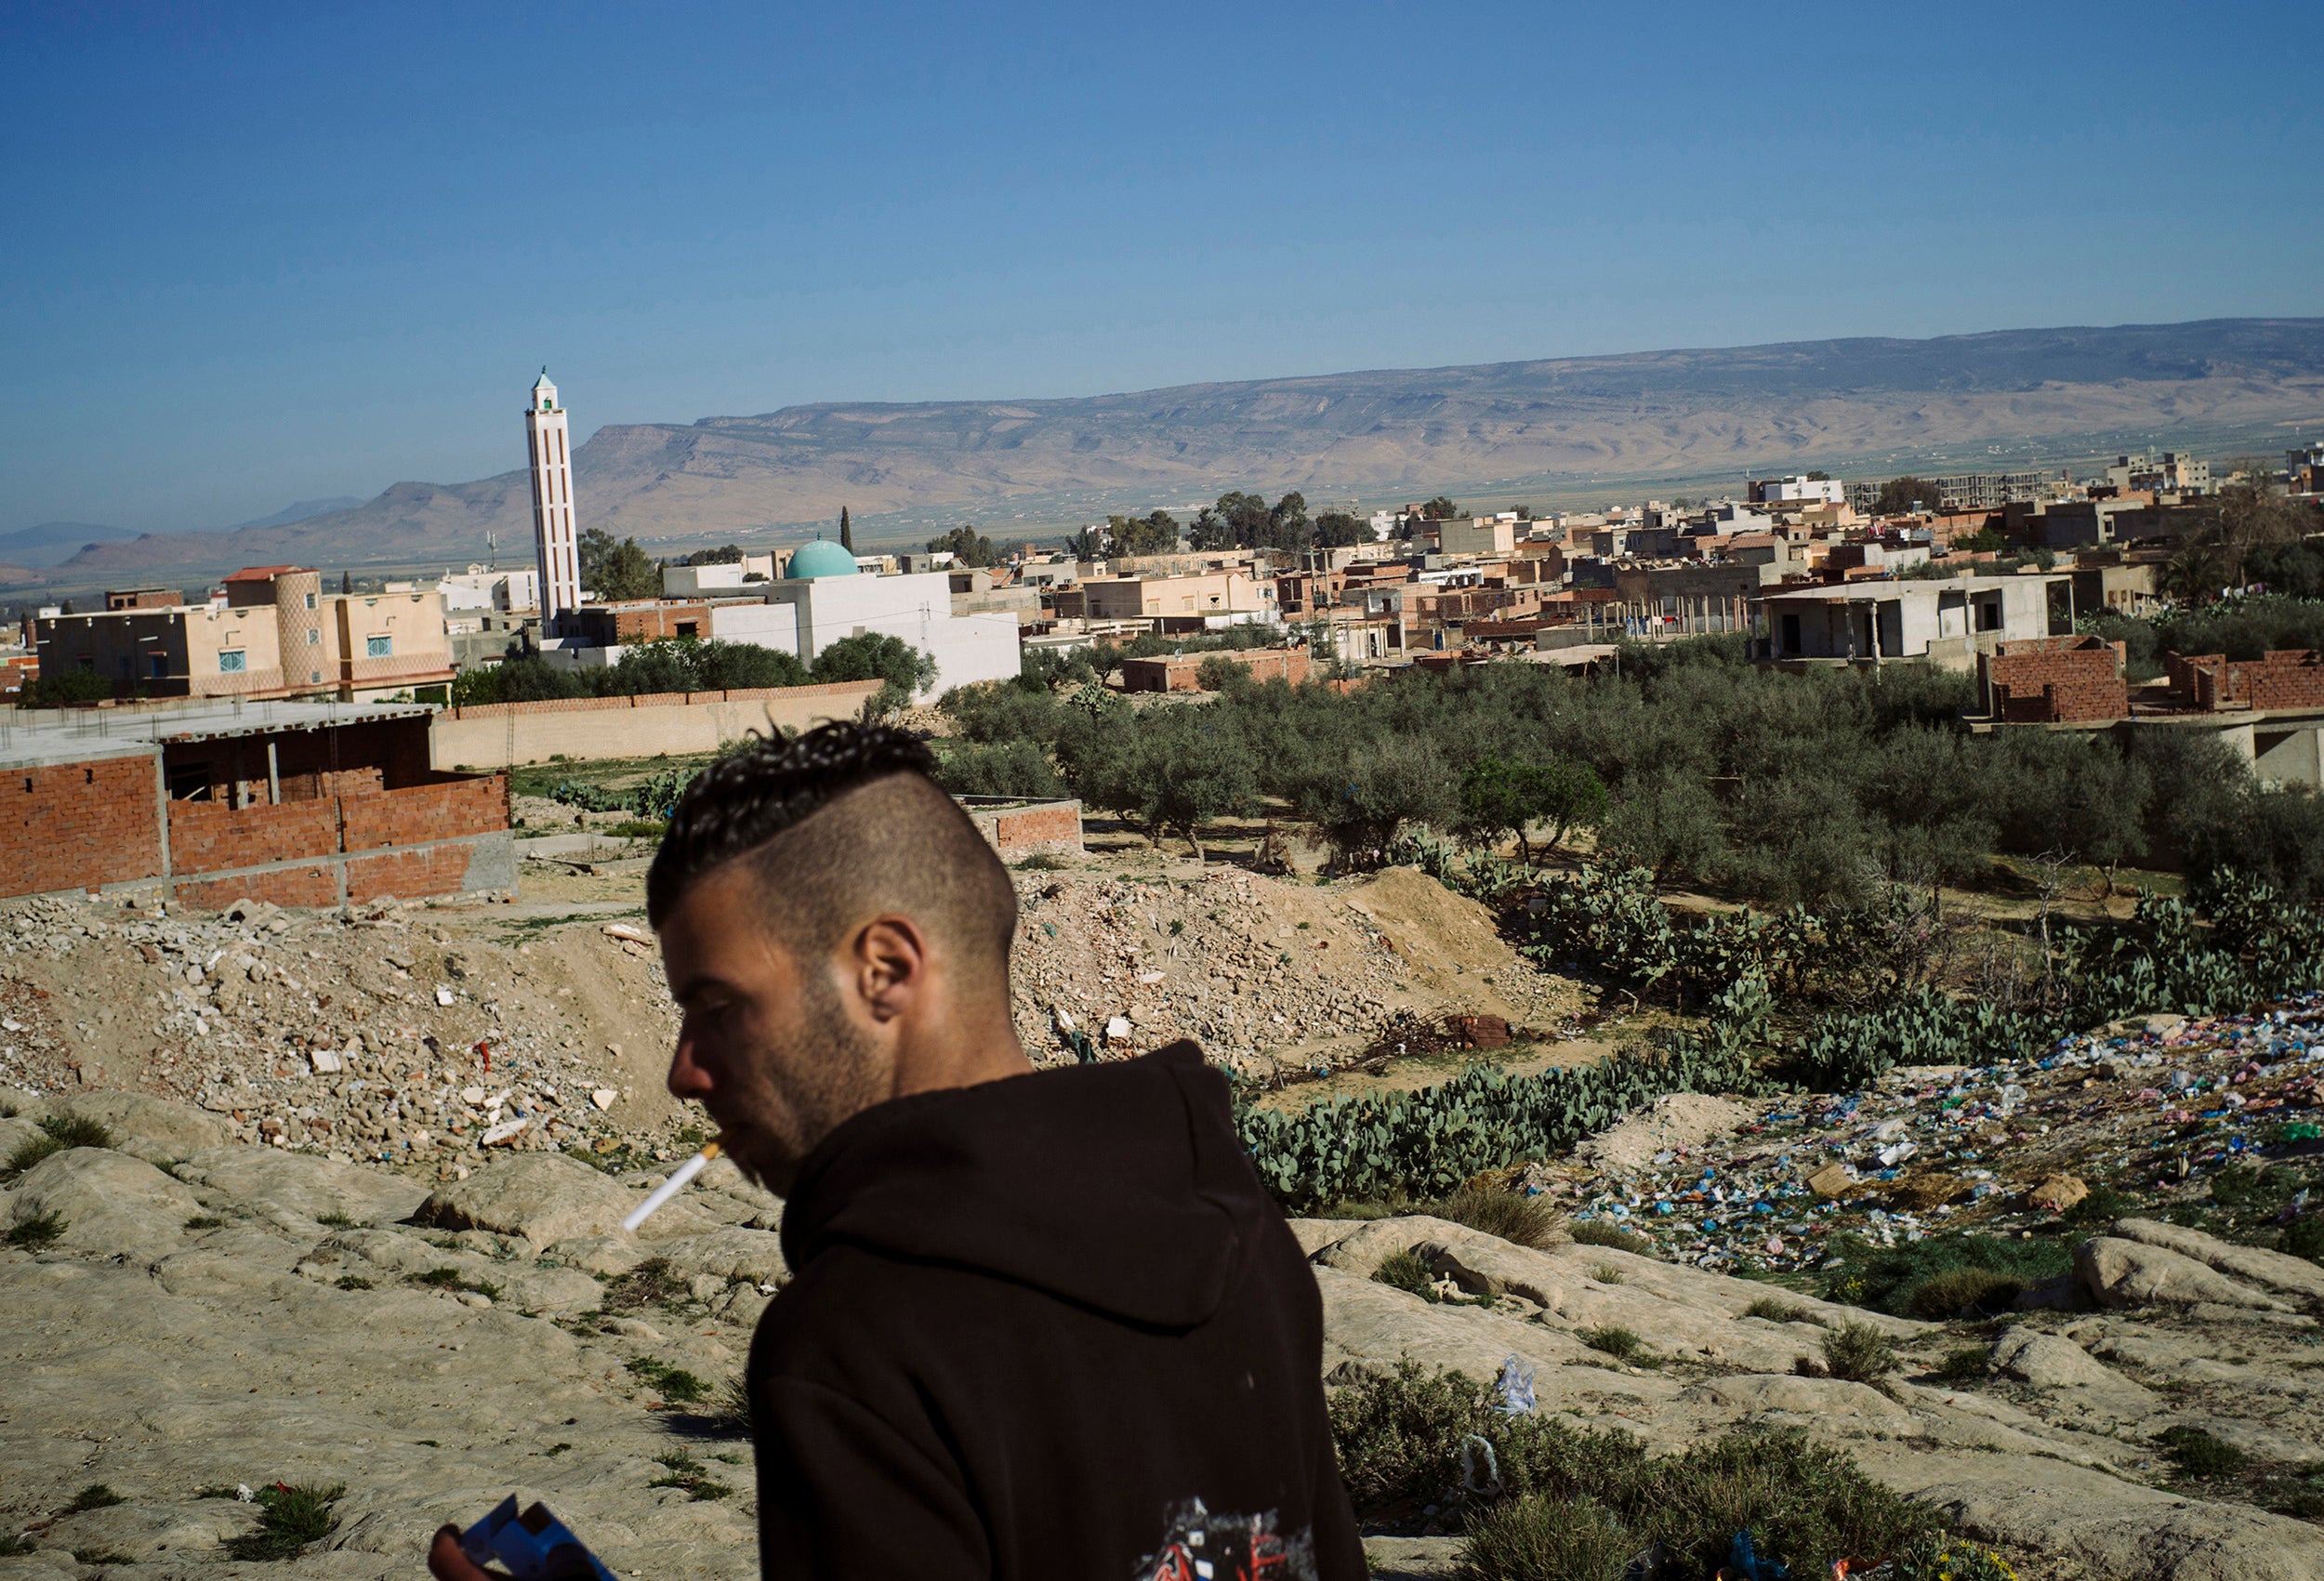 Karma is one of the poorest neighbourhoods in Kasserine. Dozens of families have sons who have joined the militants